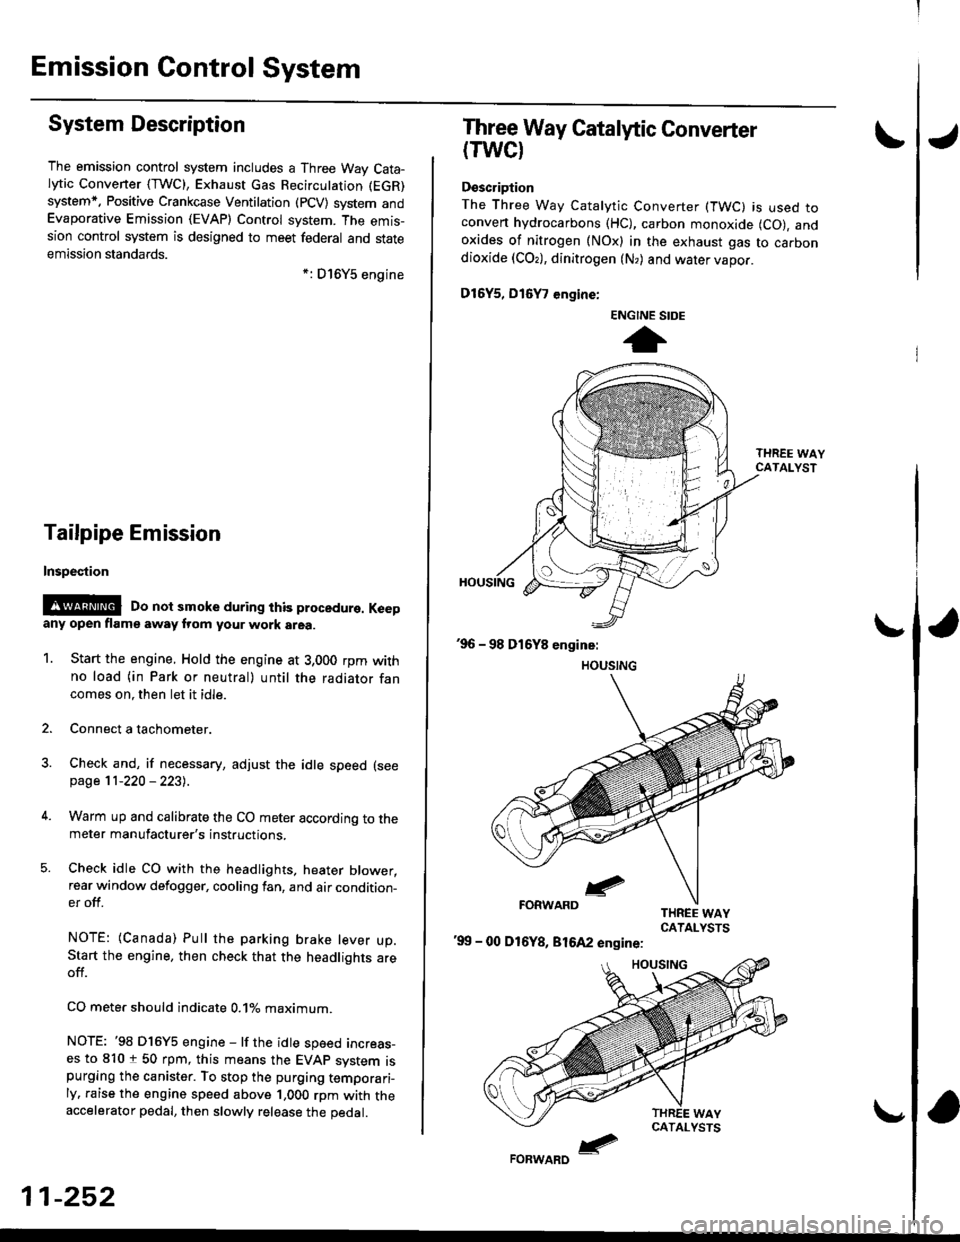 HONDA CIVIC 1996 6.G Owners Guide Emission Gontrol System
System Description
The emission control system includes a Three Way Cata-lytic Convener (TWC), Exhaust Gas Recirculation (EGR)
system,. Positive Crankcase Ventilation (pCV) sys